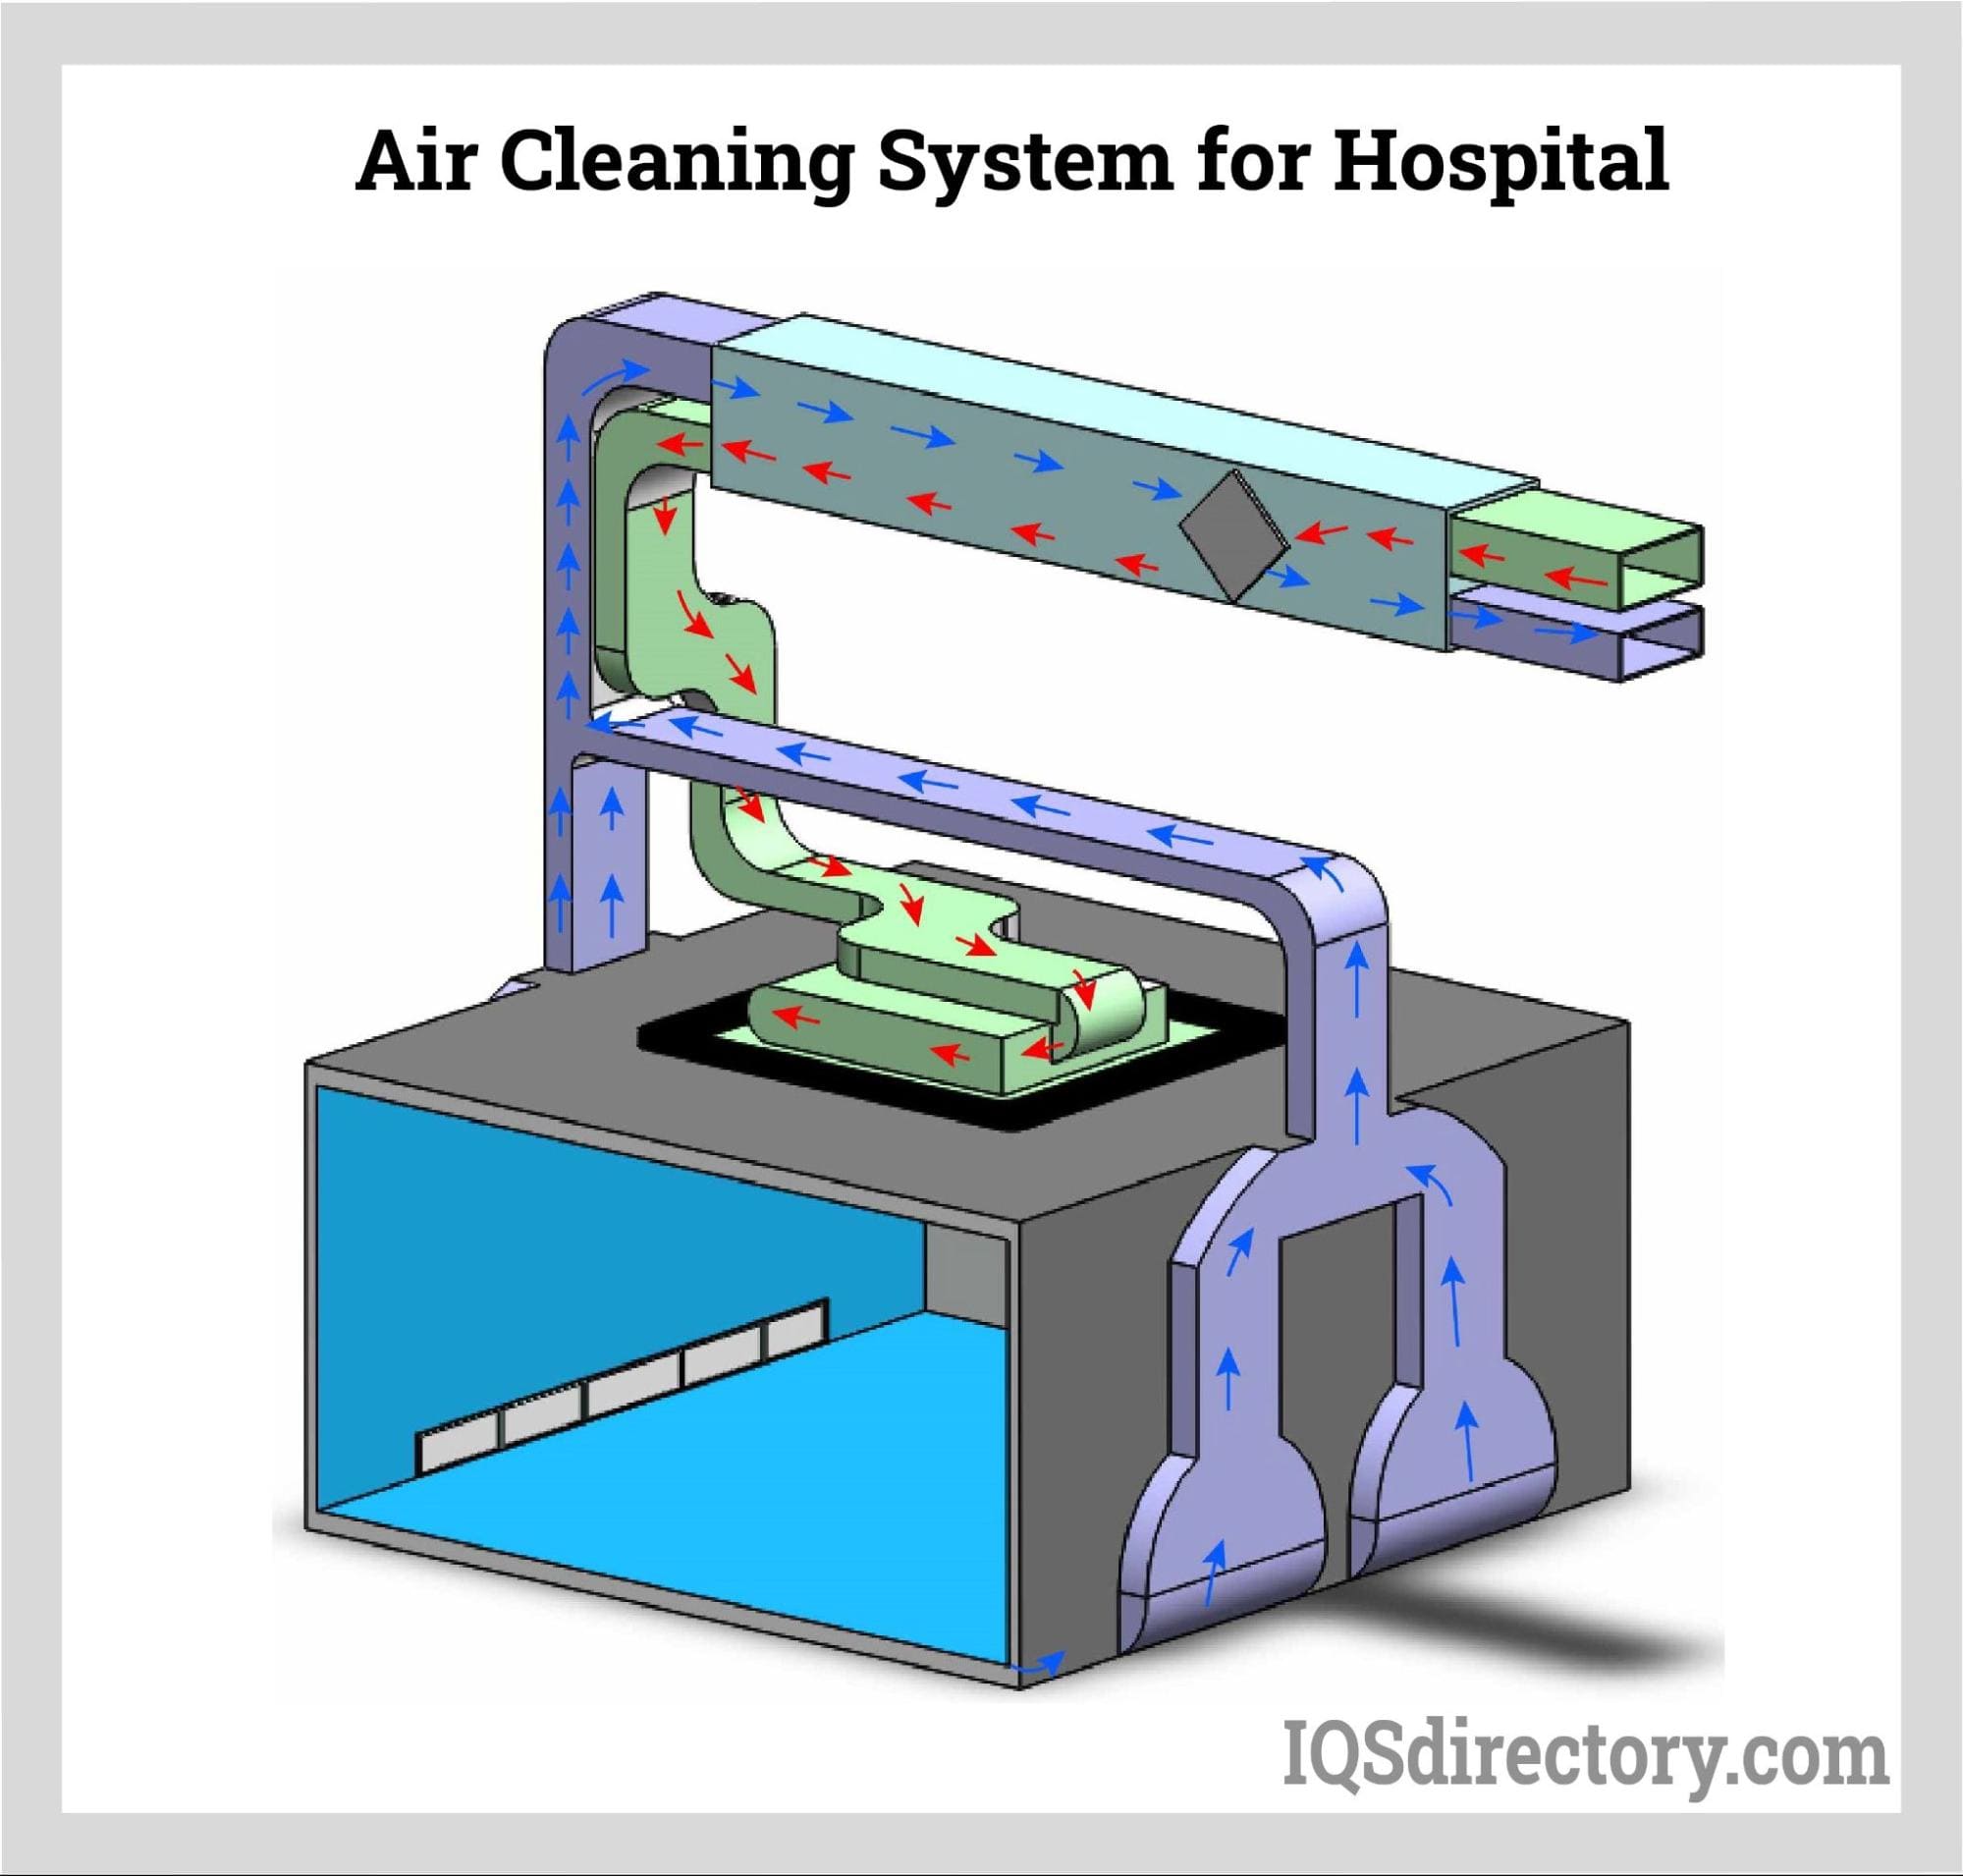 Air Cleaning System for Hospital